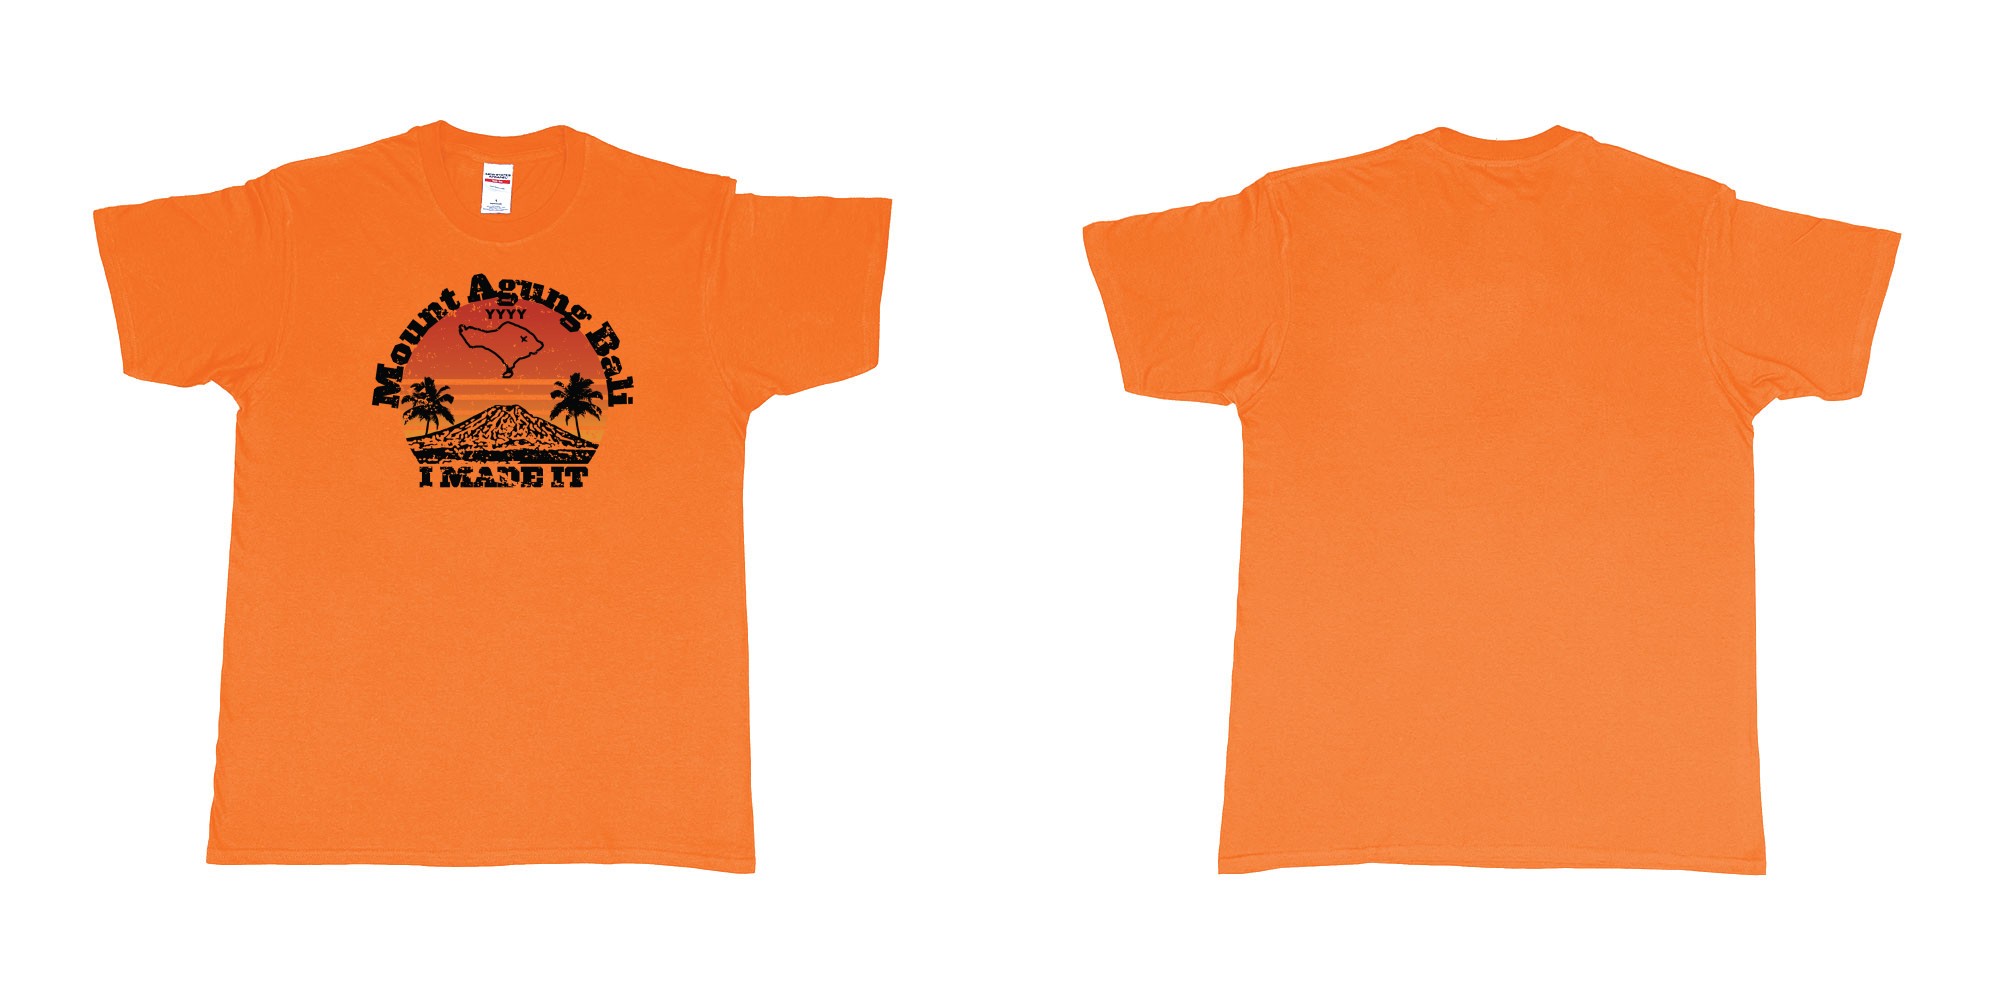 Custom tshirt design mount agung bali i made it in fabric color orange choice your own text made in Bali by The Pirate Way